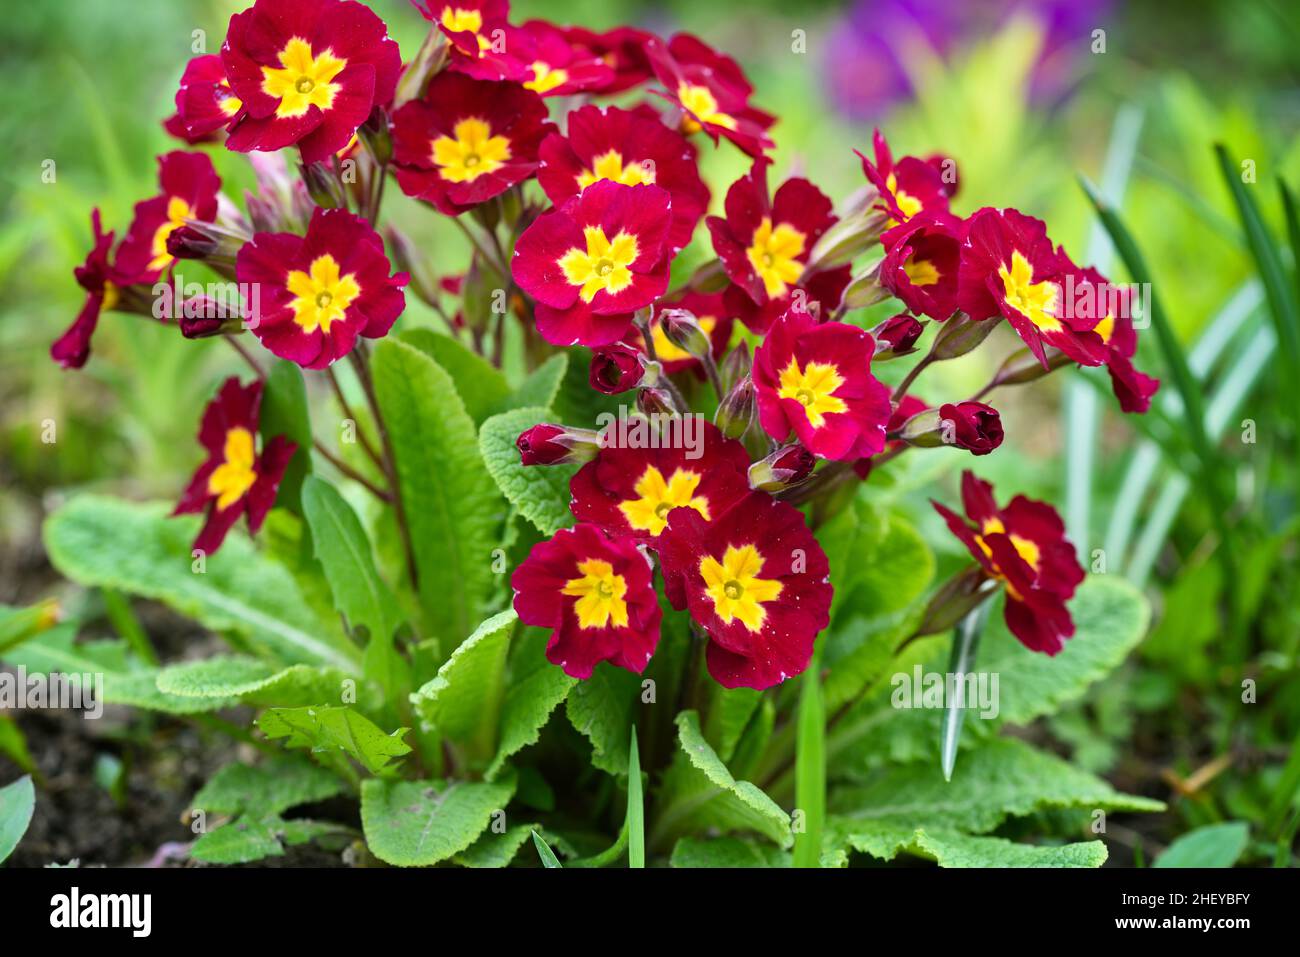 Flowers of Primula vulgaris red or red primrose in the spring garden. Stock Photo